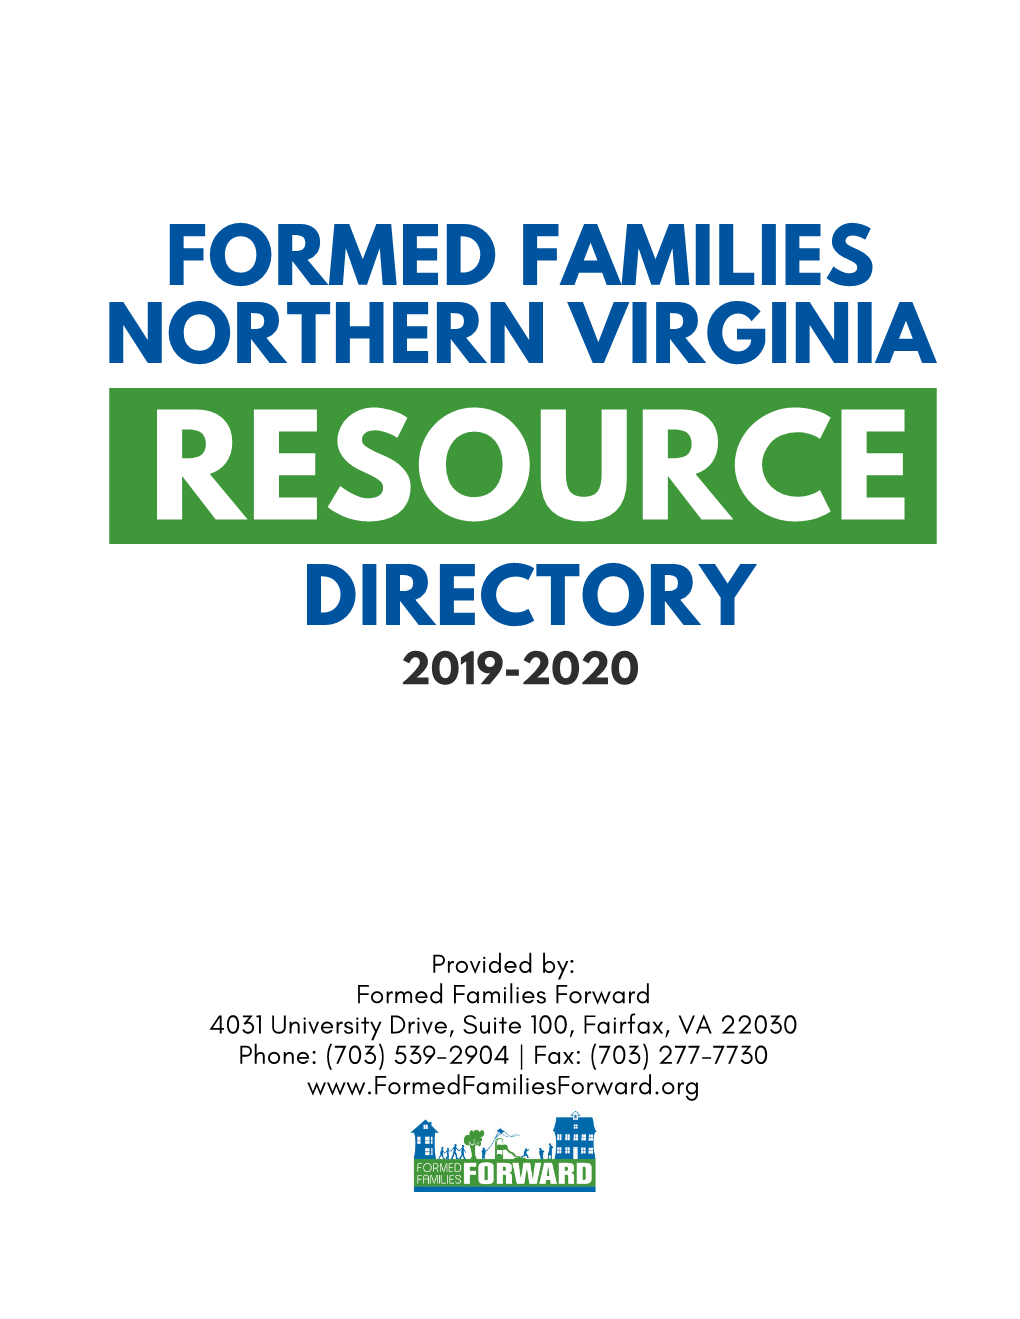 Directory Formed Families Northern Virginia